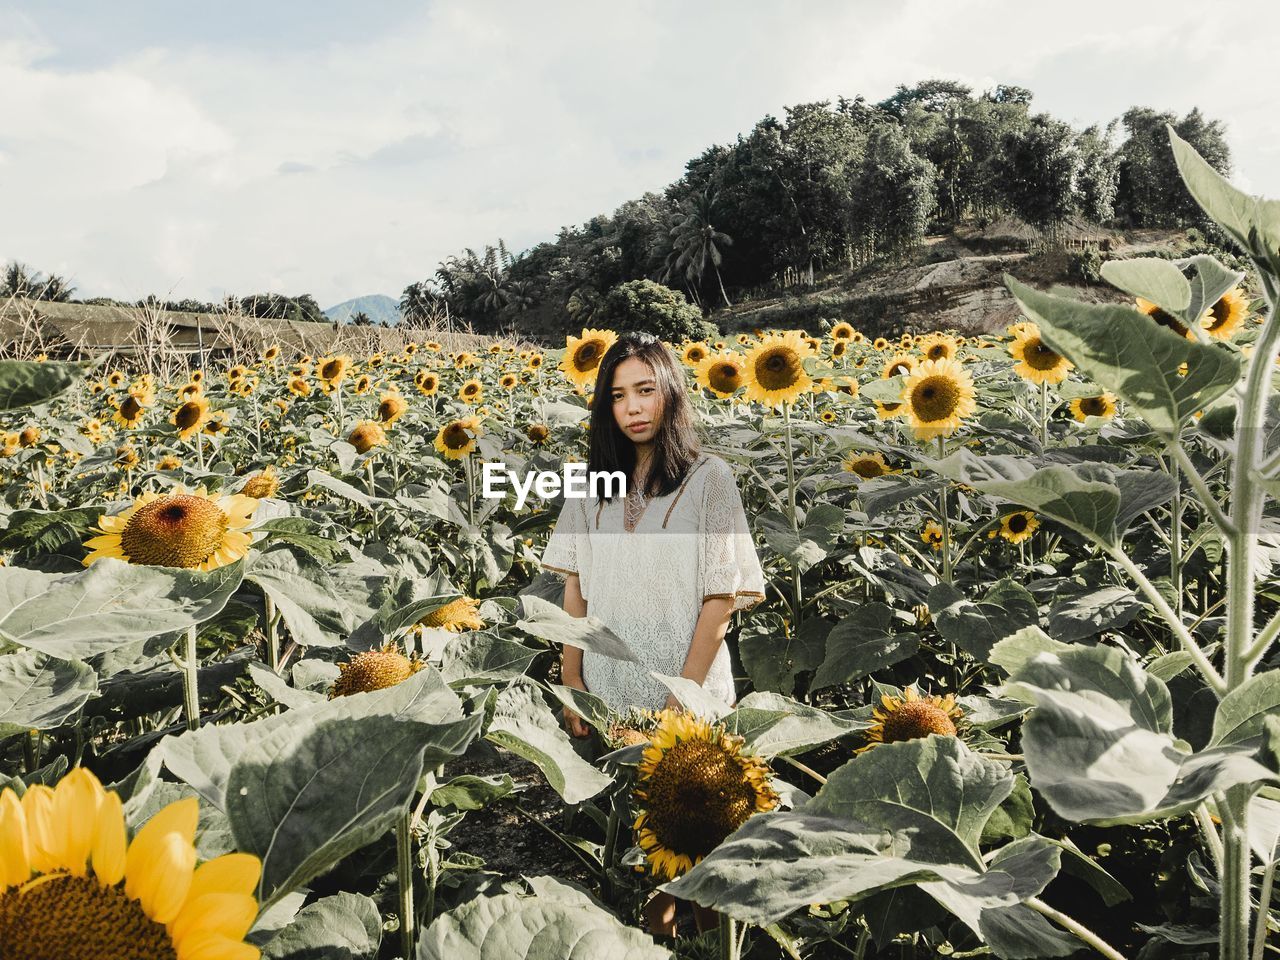 PORTRAIT OF YOUNG WOMAN STANDING BY FLOWERS AGAINST PLANTS